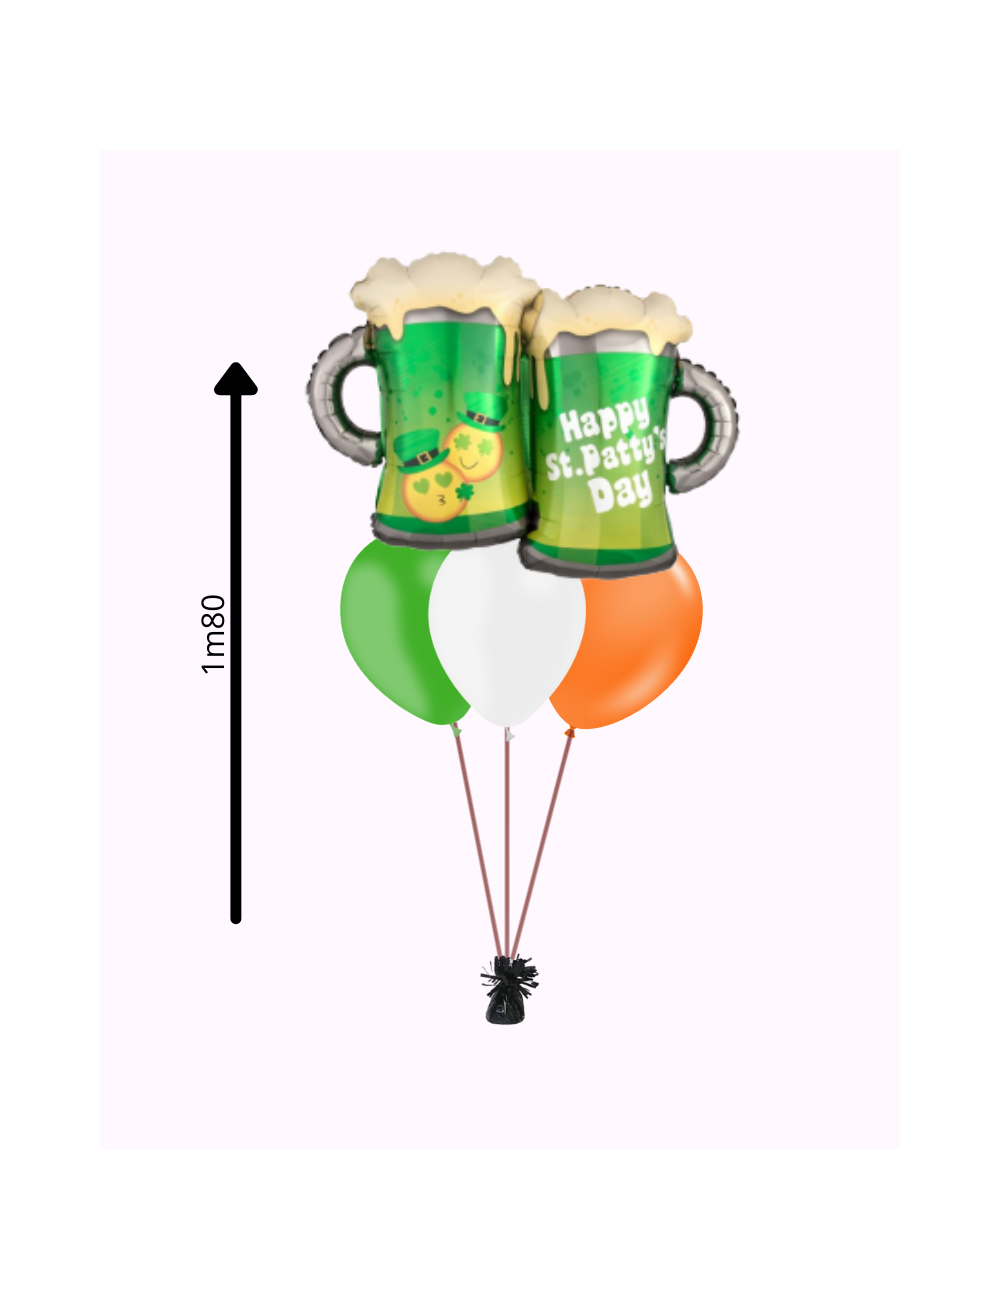 St Patrick Balloon Bouquet with beer-shaped balls